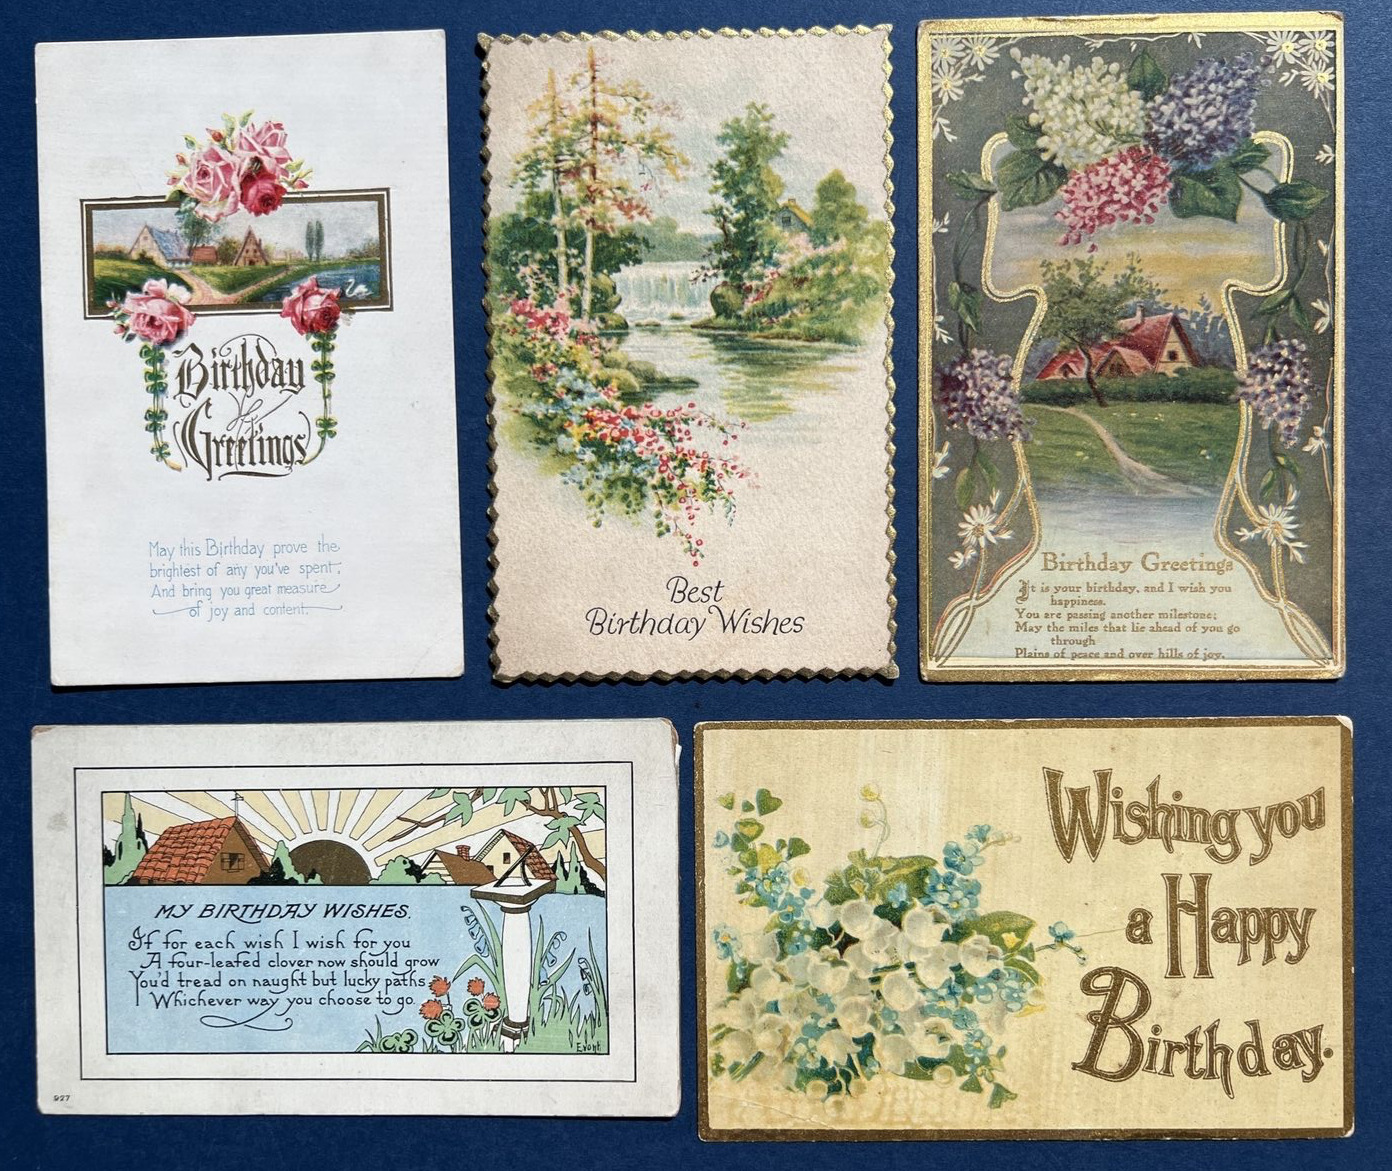 Mixture 5 Birthday Antique Postcards. Gold In The Design. Rural & Home Scenes